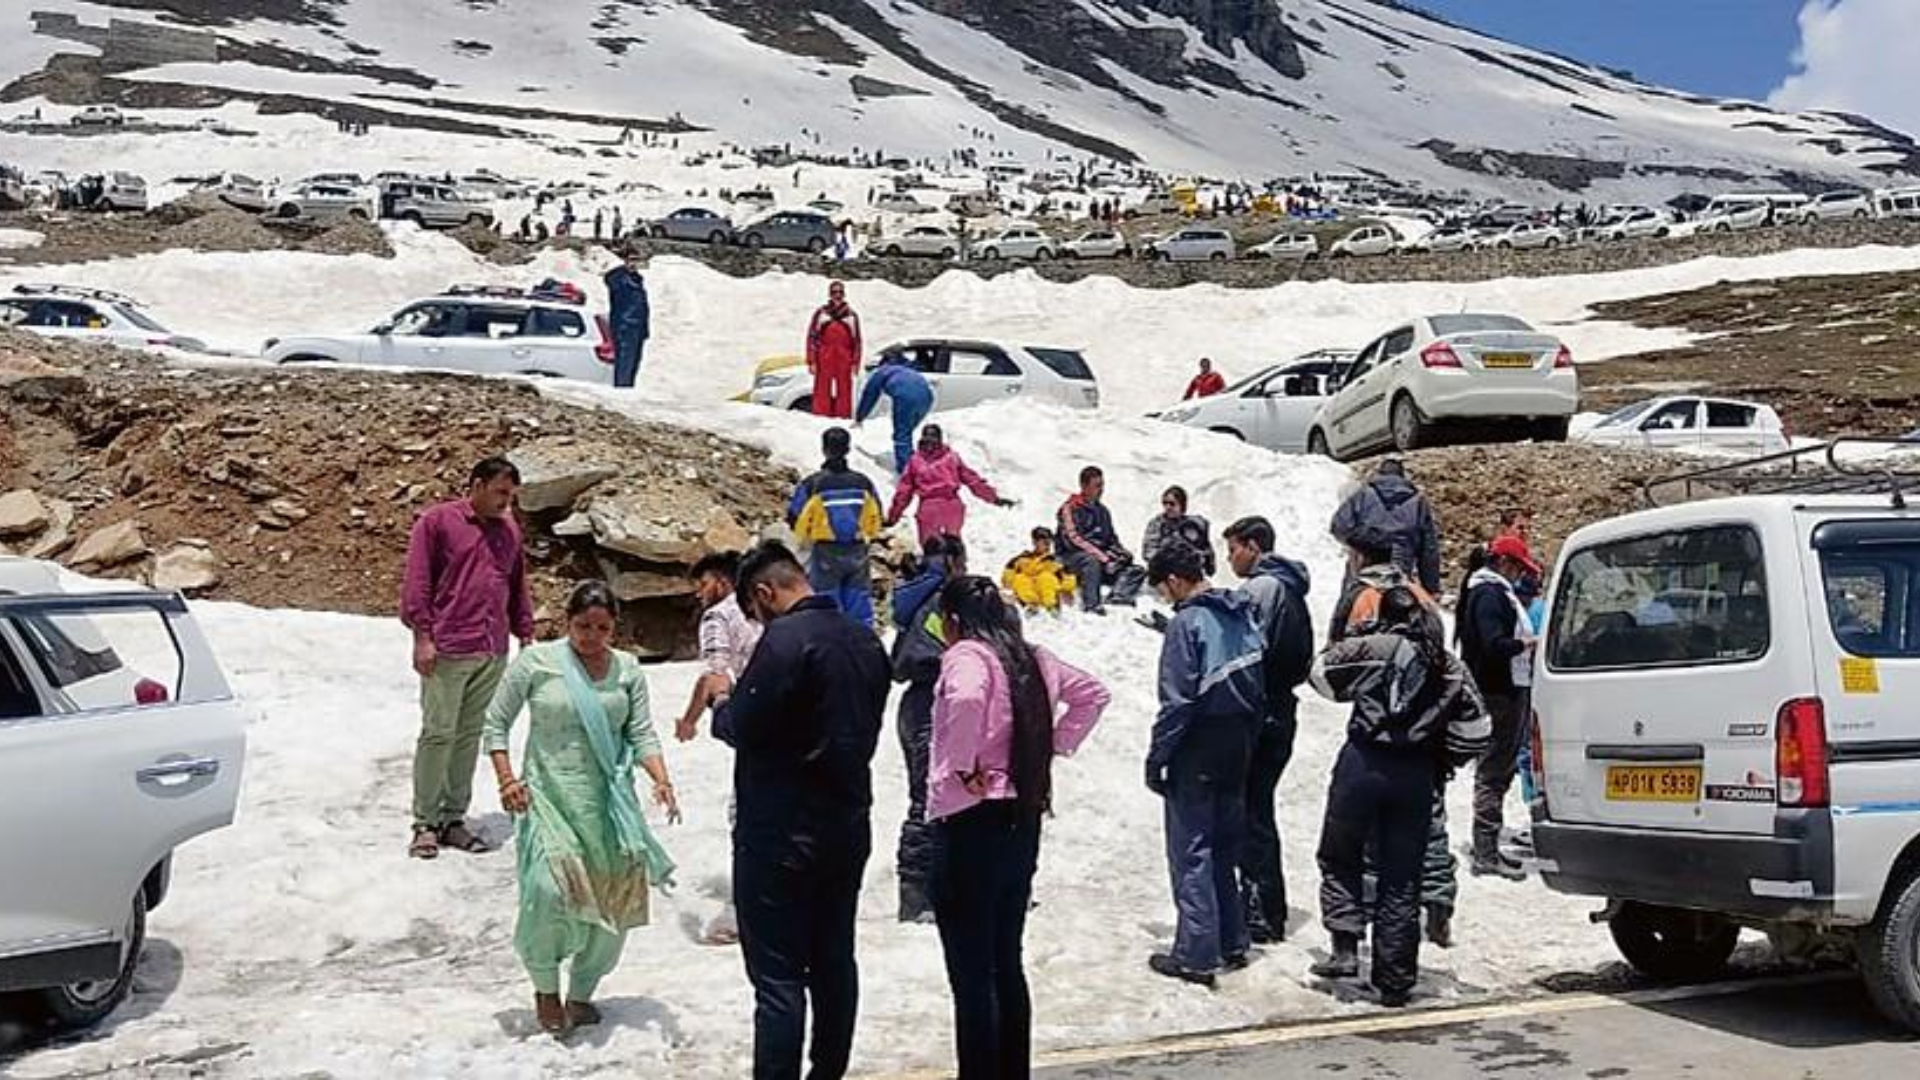 Heavy Traffic Jam At Rohtang Pass Due To Surge In Tourist Footfall In Kullu, Himachal